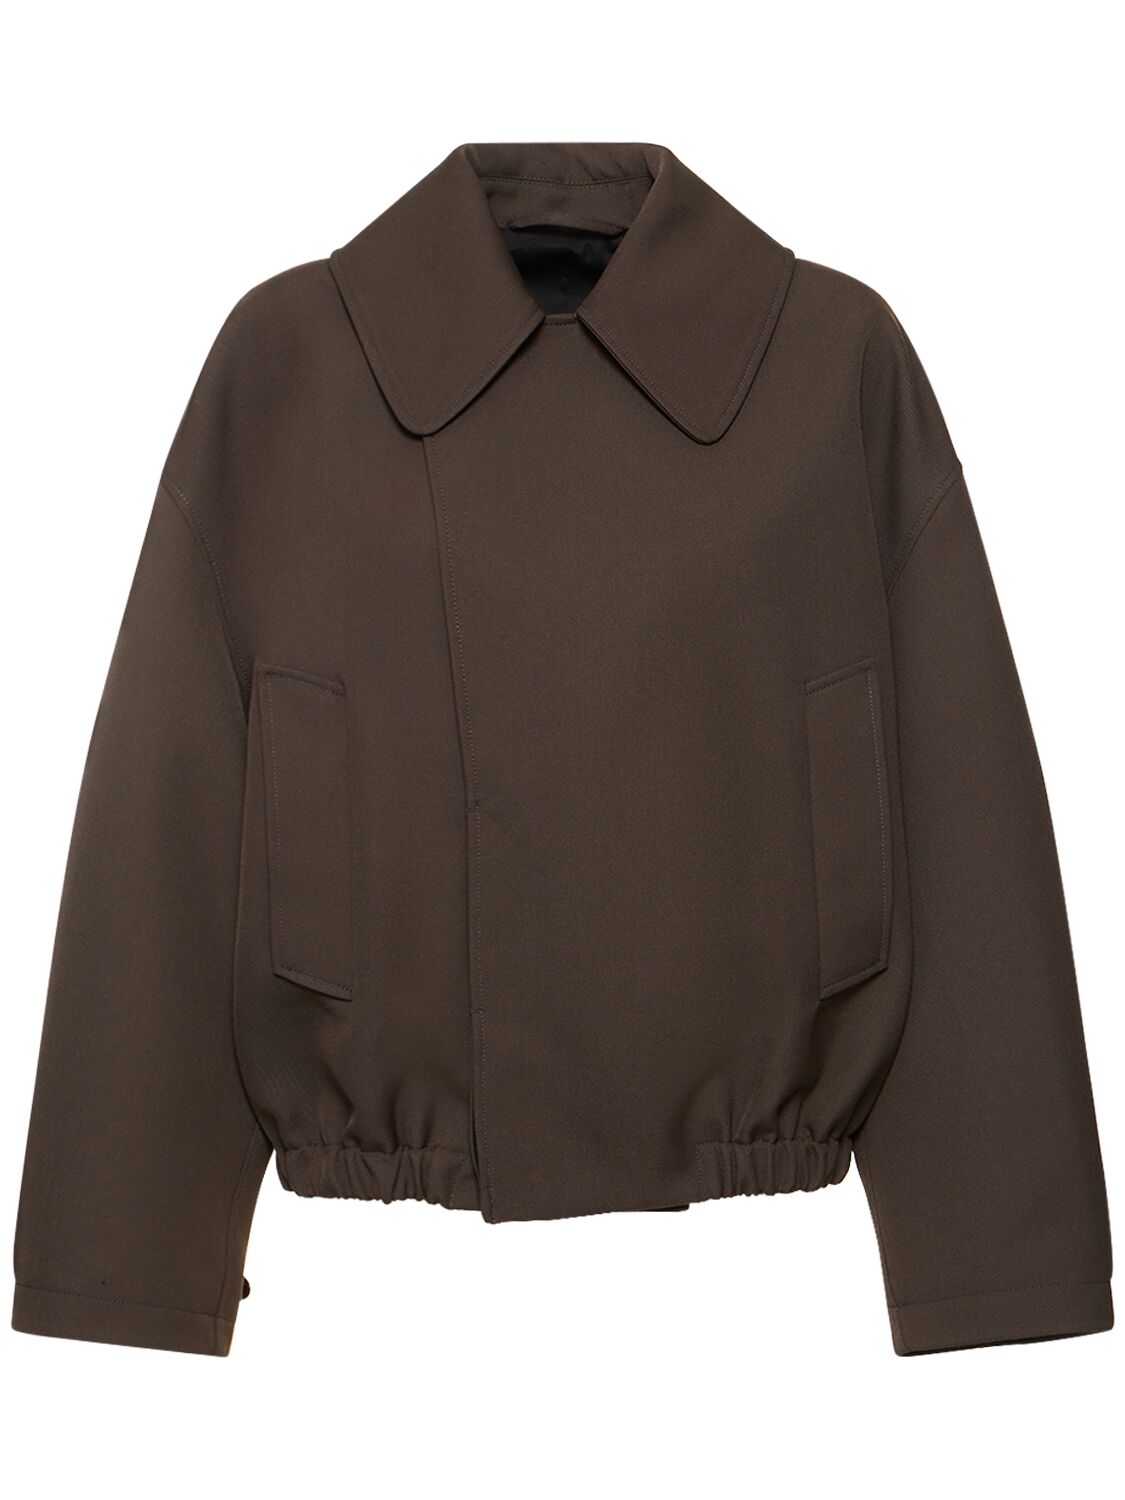 Image of Wool Blend Short Trench Jacket